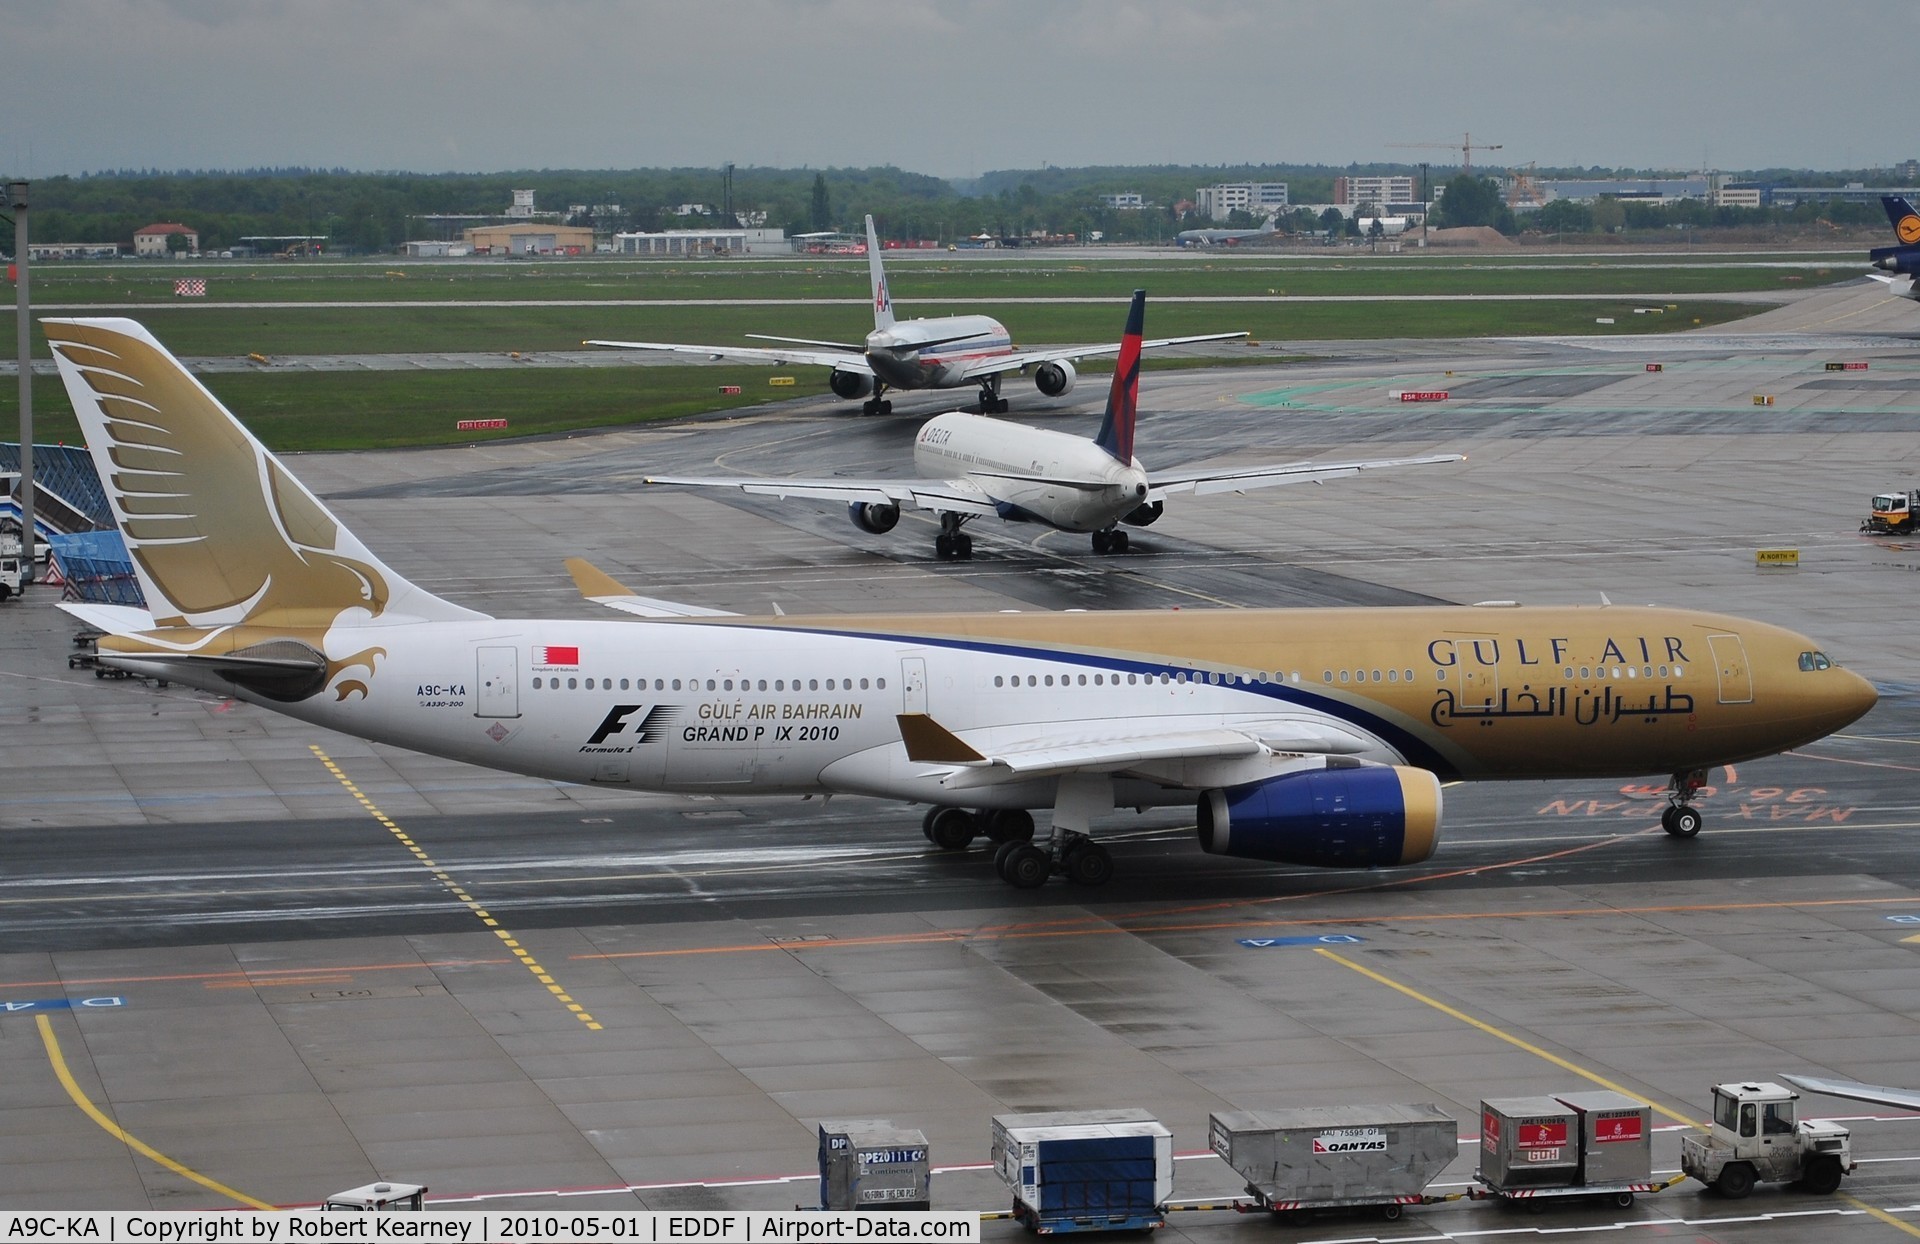 A9C-KA, 1999 Airbus A330-243 C/N 276, Gulf Air taxiing for take-off